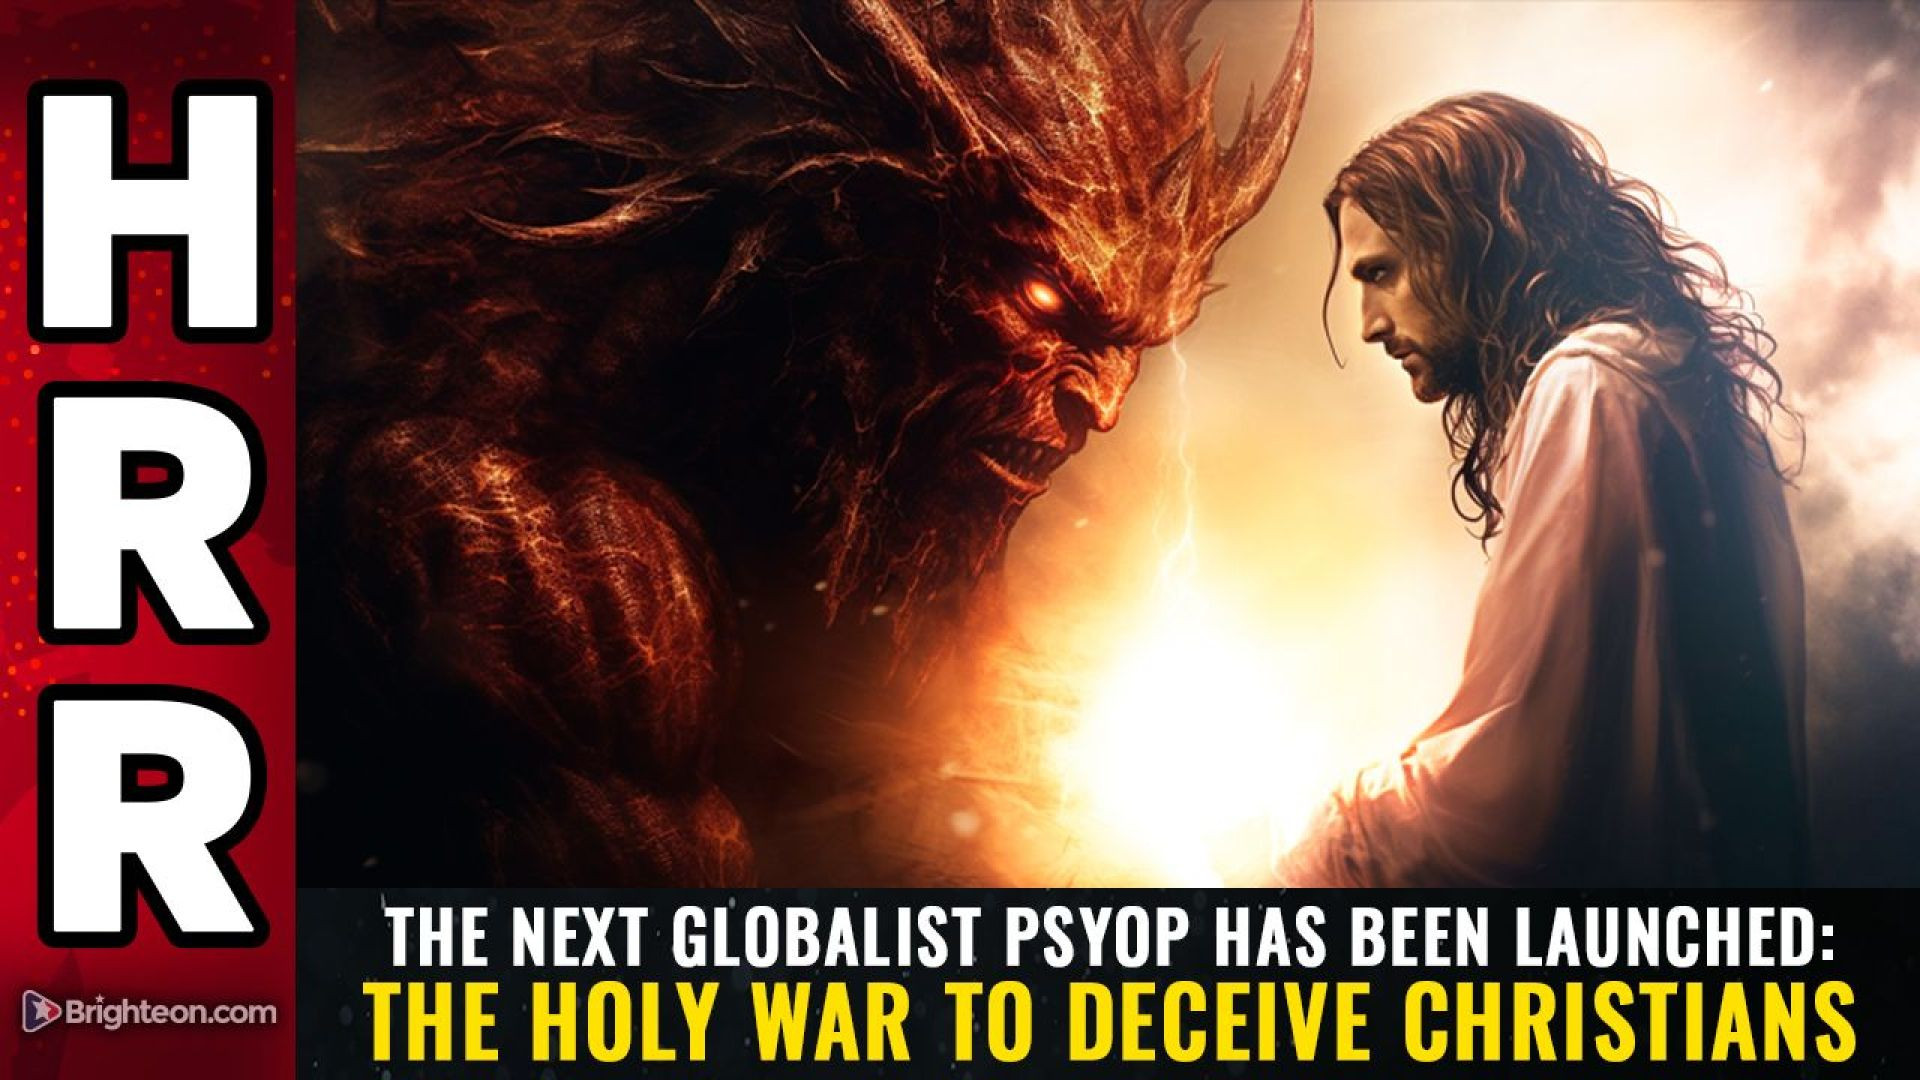 The Holy War to deceive Christians